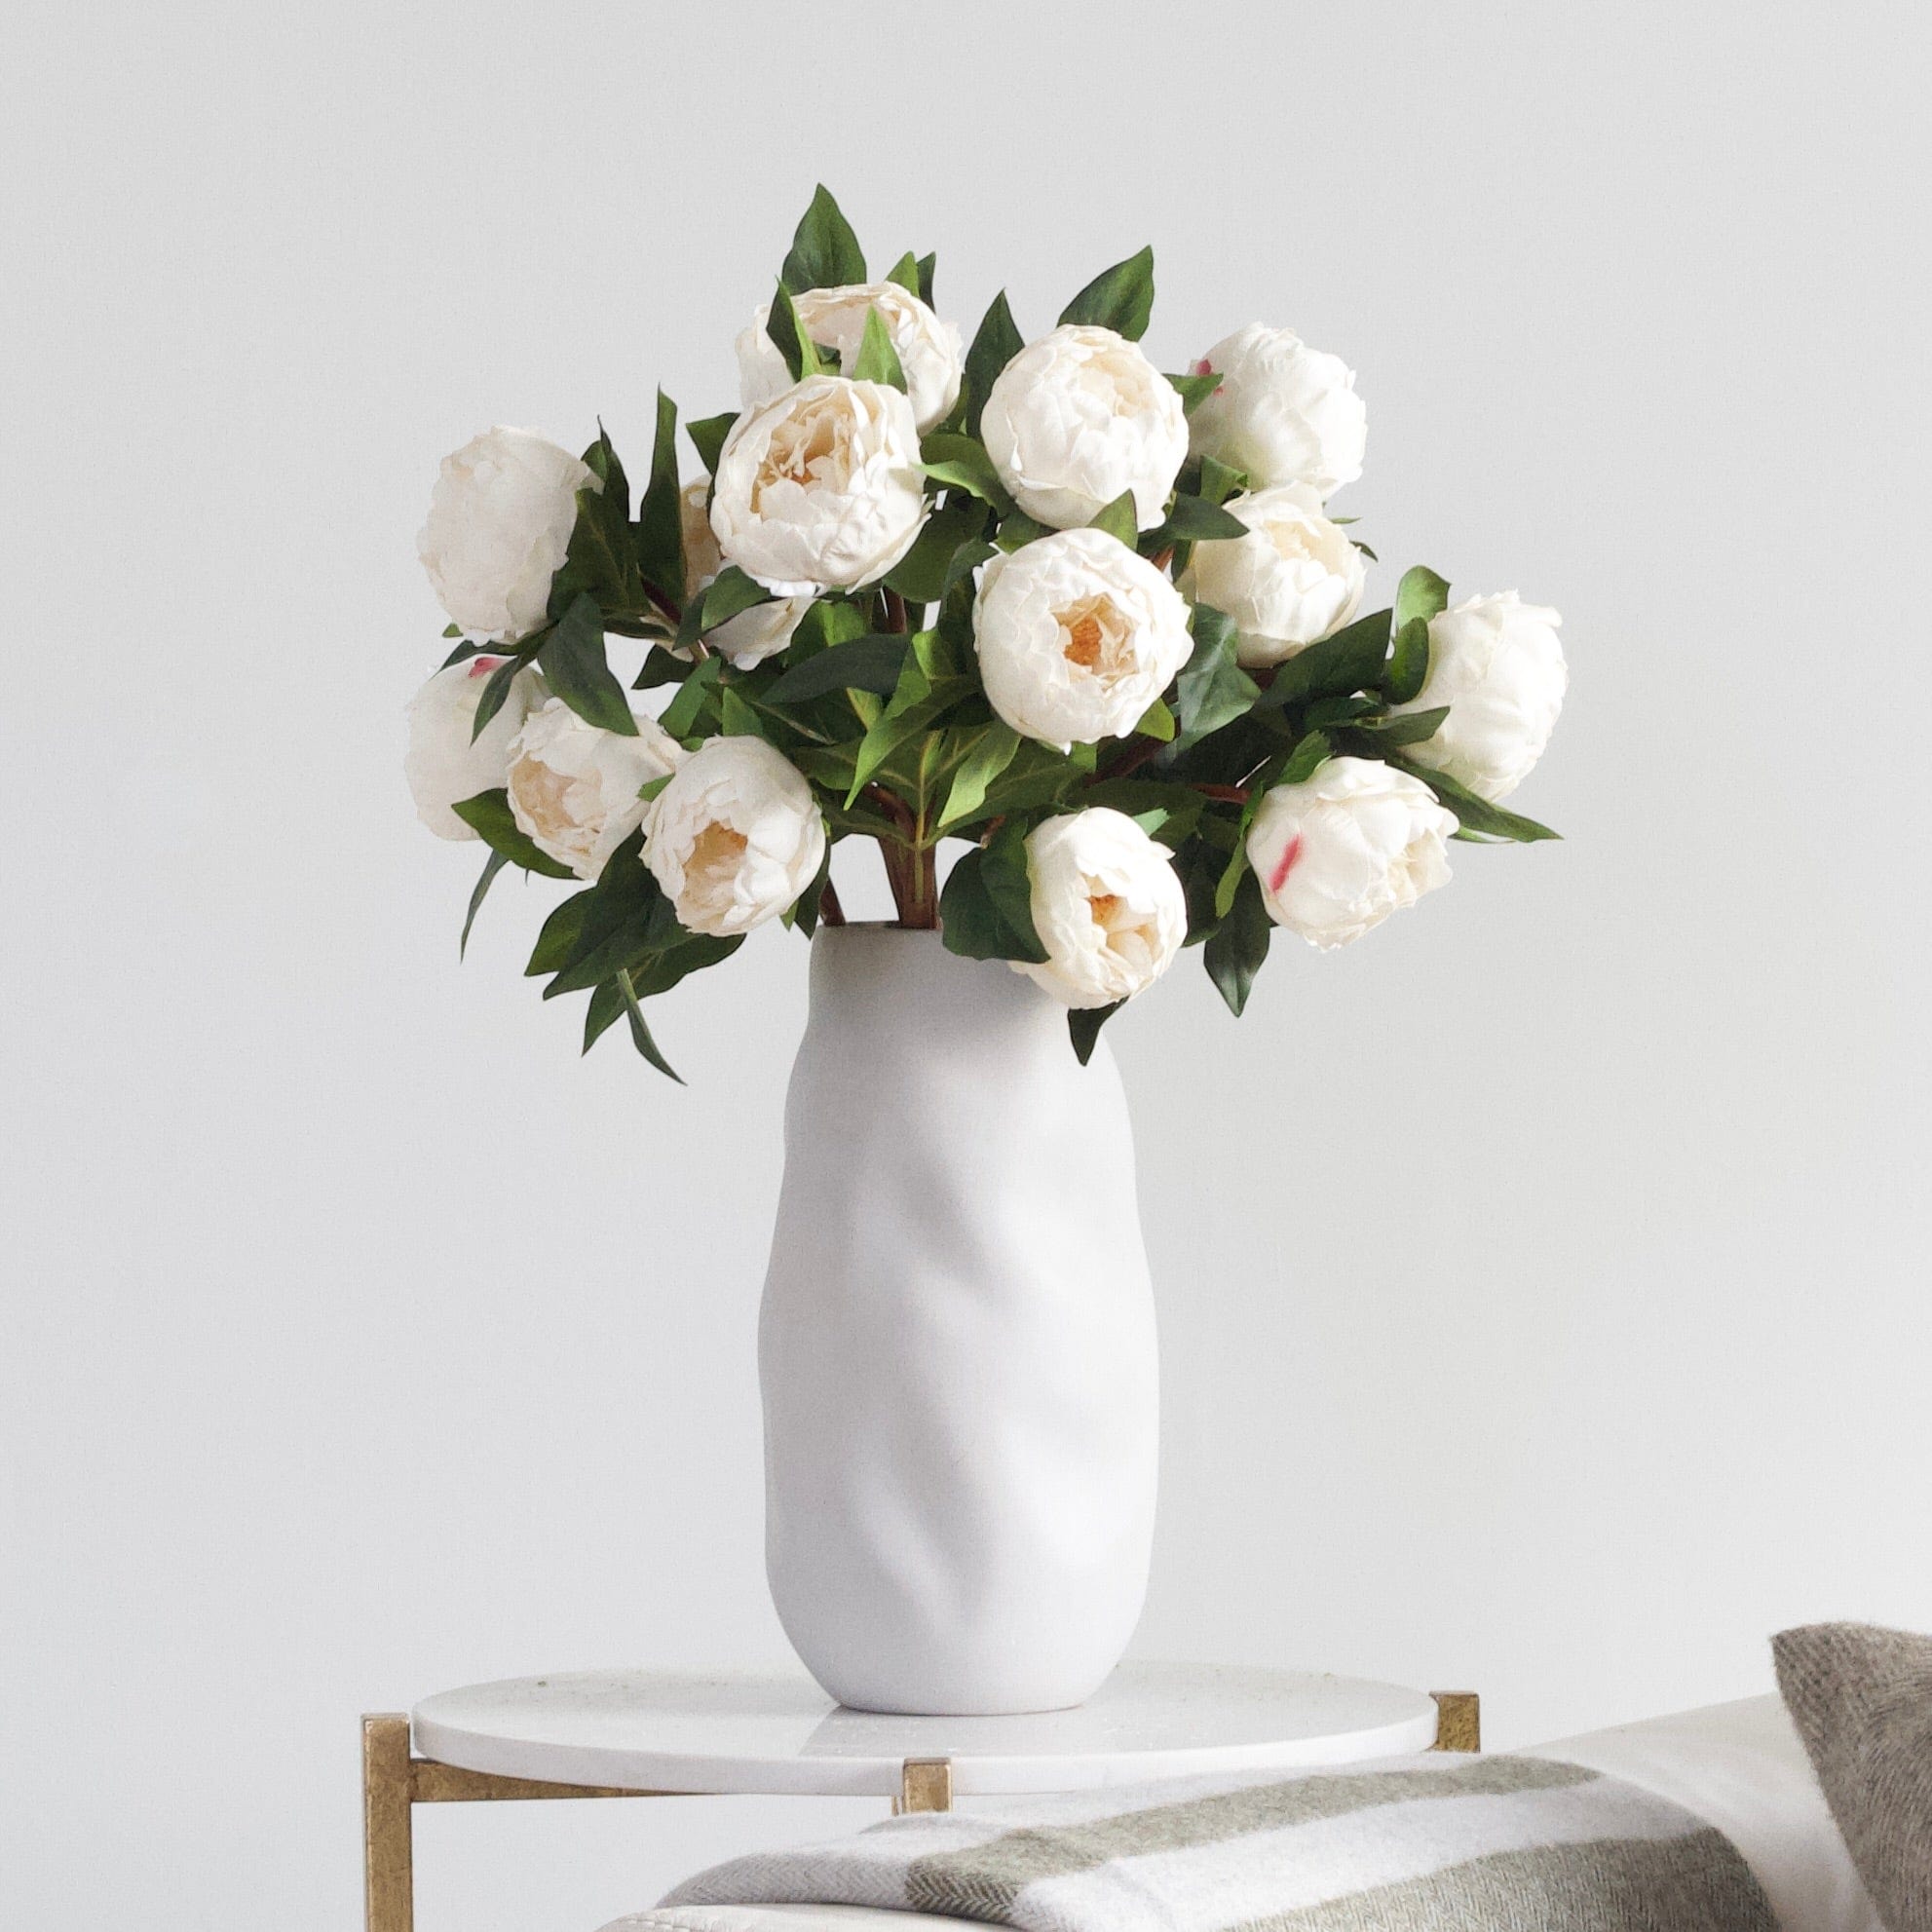 Luxury Lifelike Realistic Artificial Fabric Silk Blooms with Foliage Buy Online from The Faux Flower Company | 7 stems of White Real Touch Peony ABZ9148WH styled in Naunton Vase ABP525B